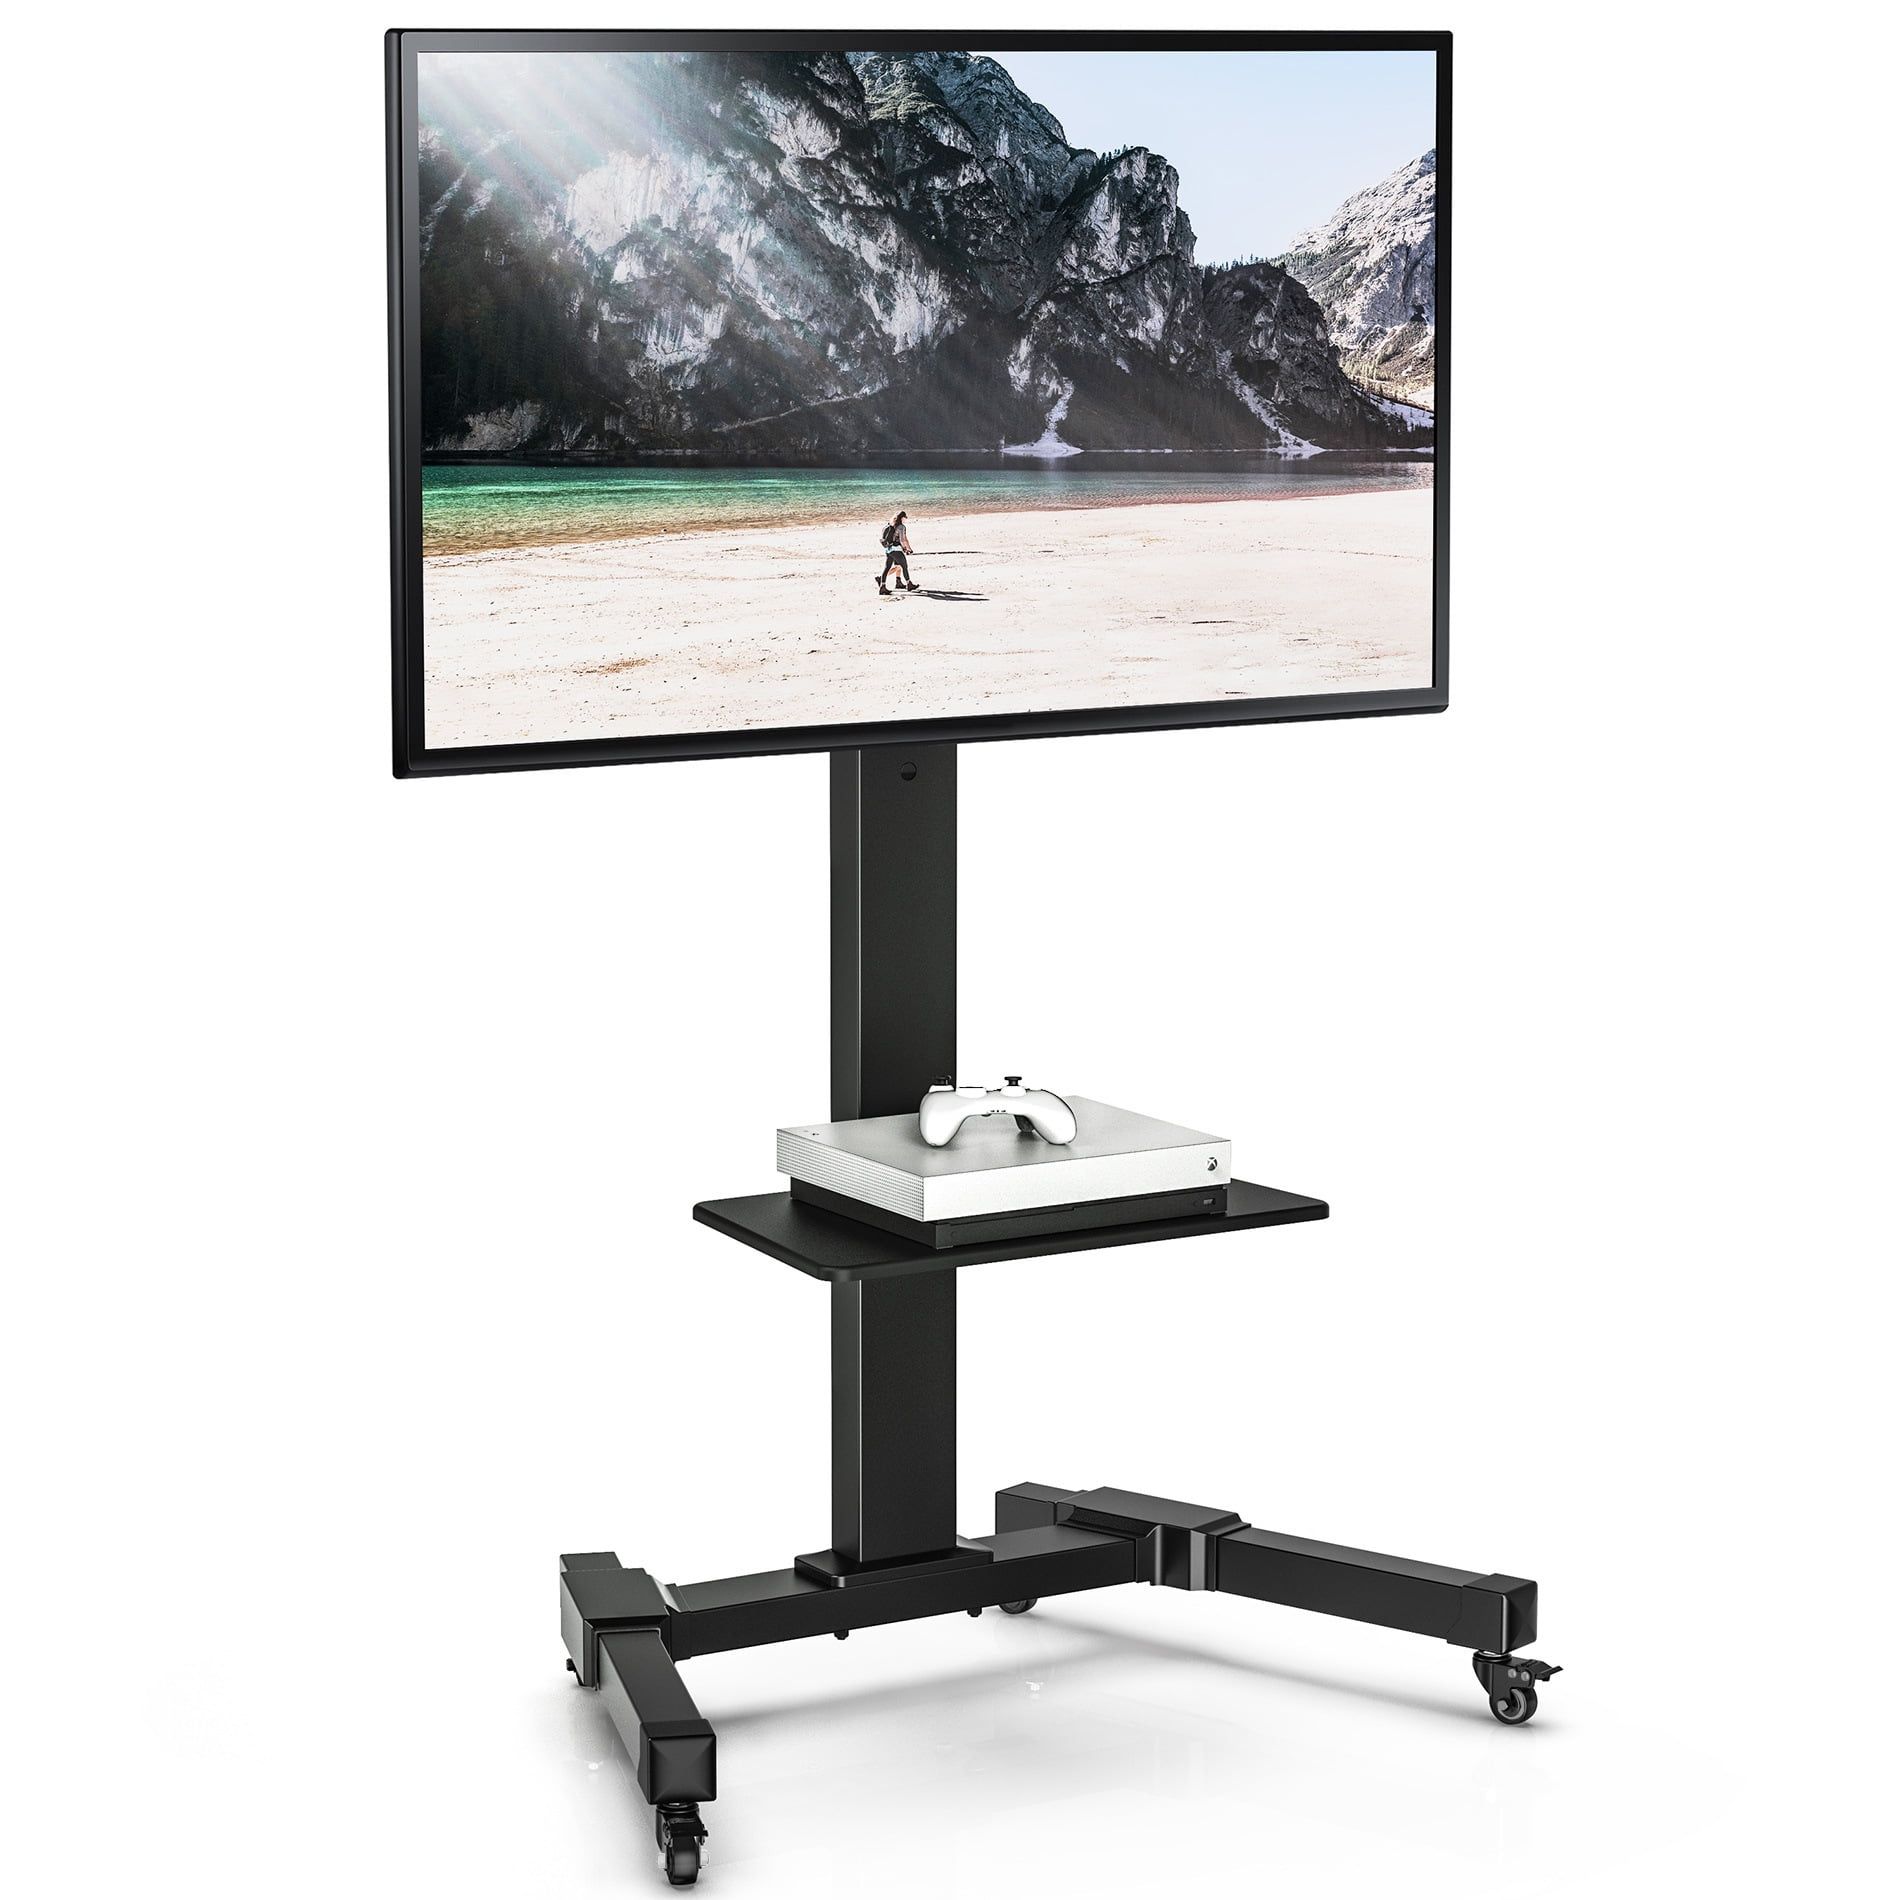 Fitueyes Mobile Swivel Tv Stand Trolley Height Adjustable For 32 To 70 In Mobile Tilt Rolling Tv Stands (Gallery 11 of 20)